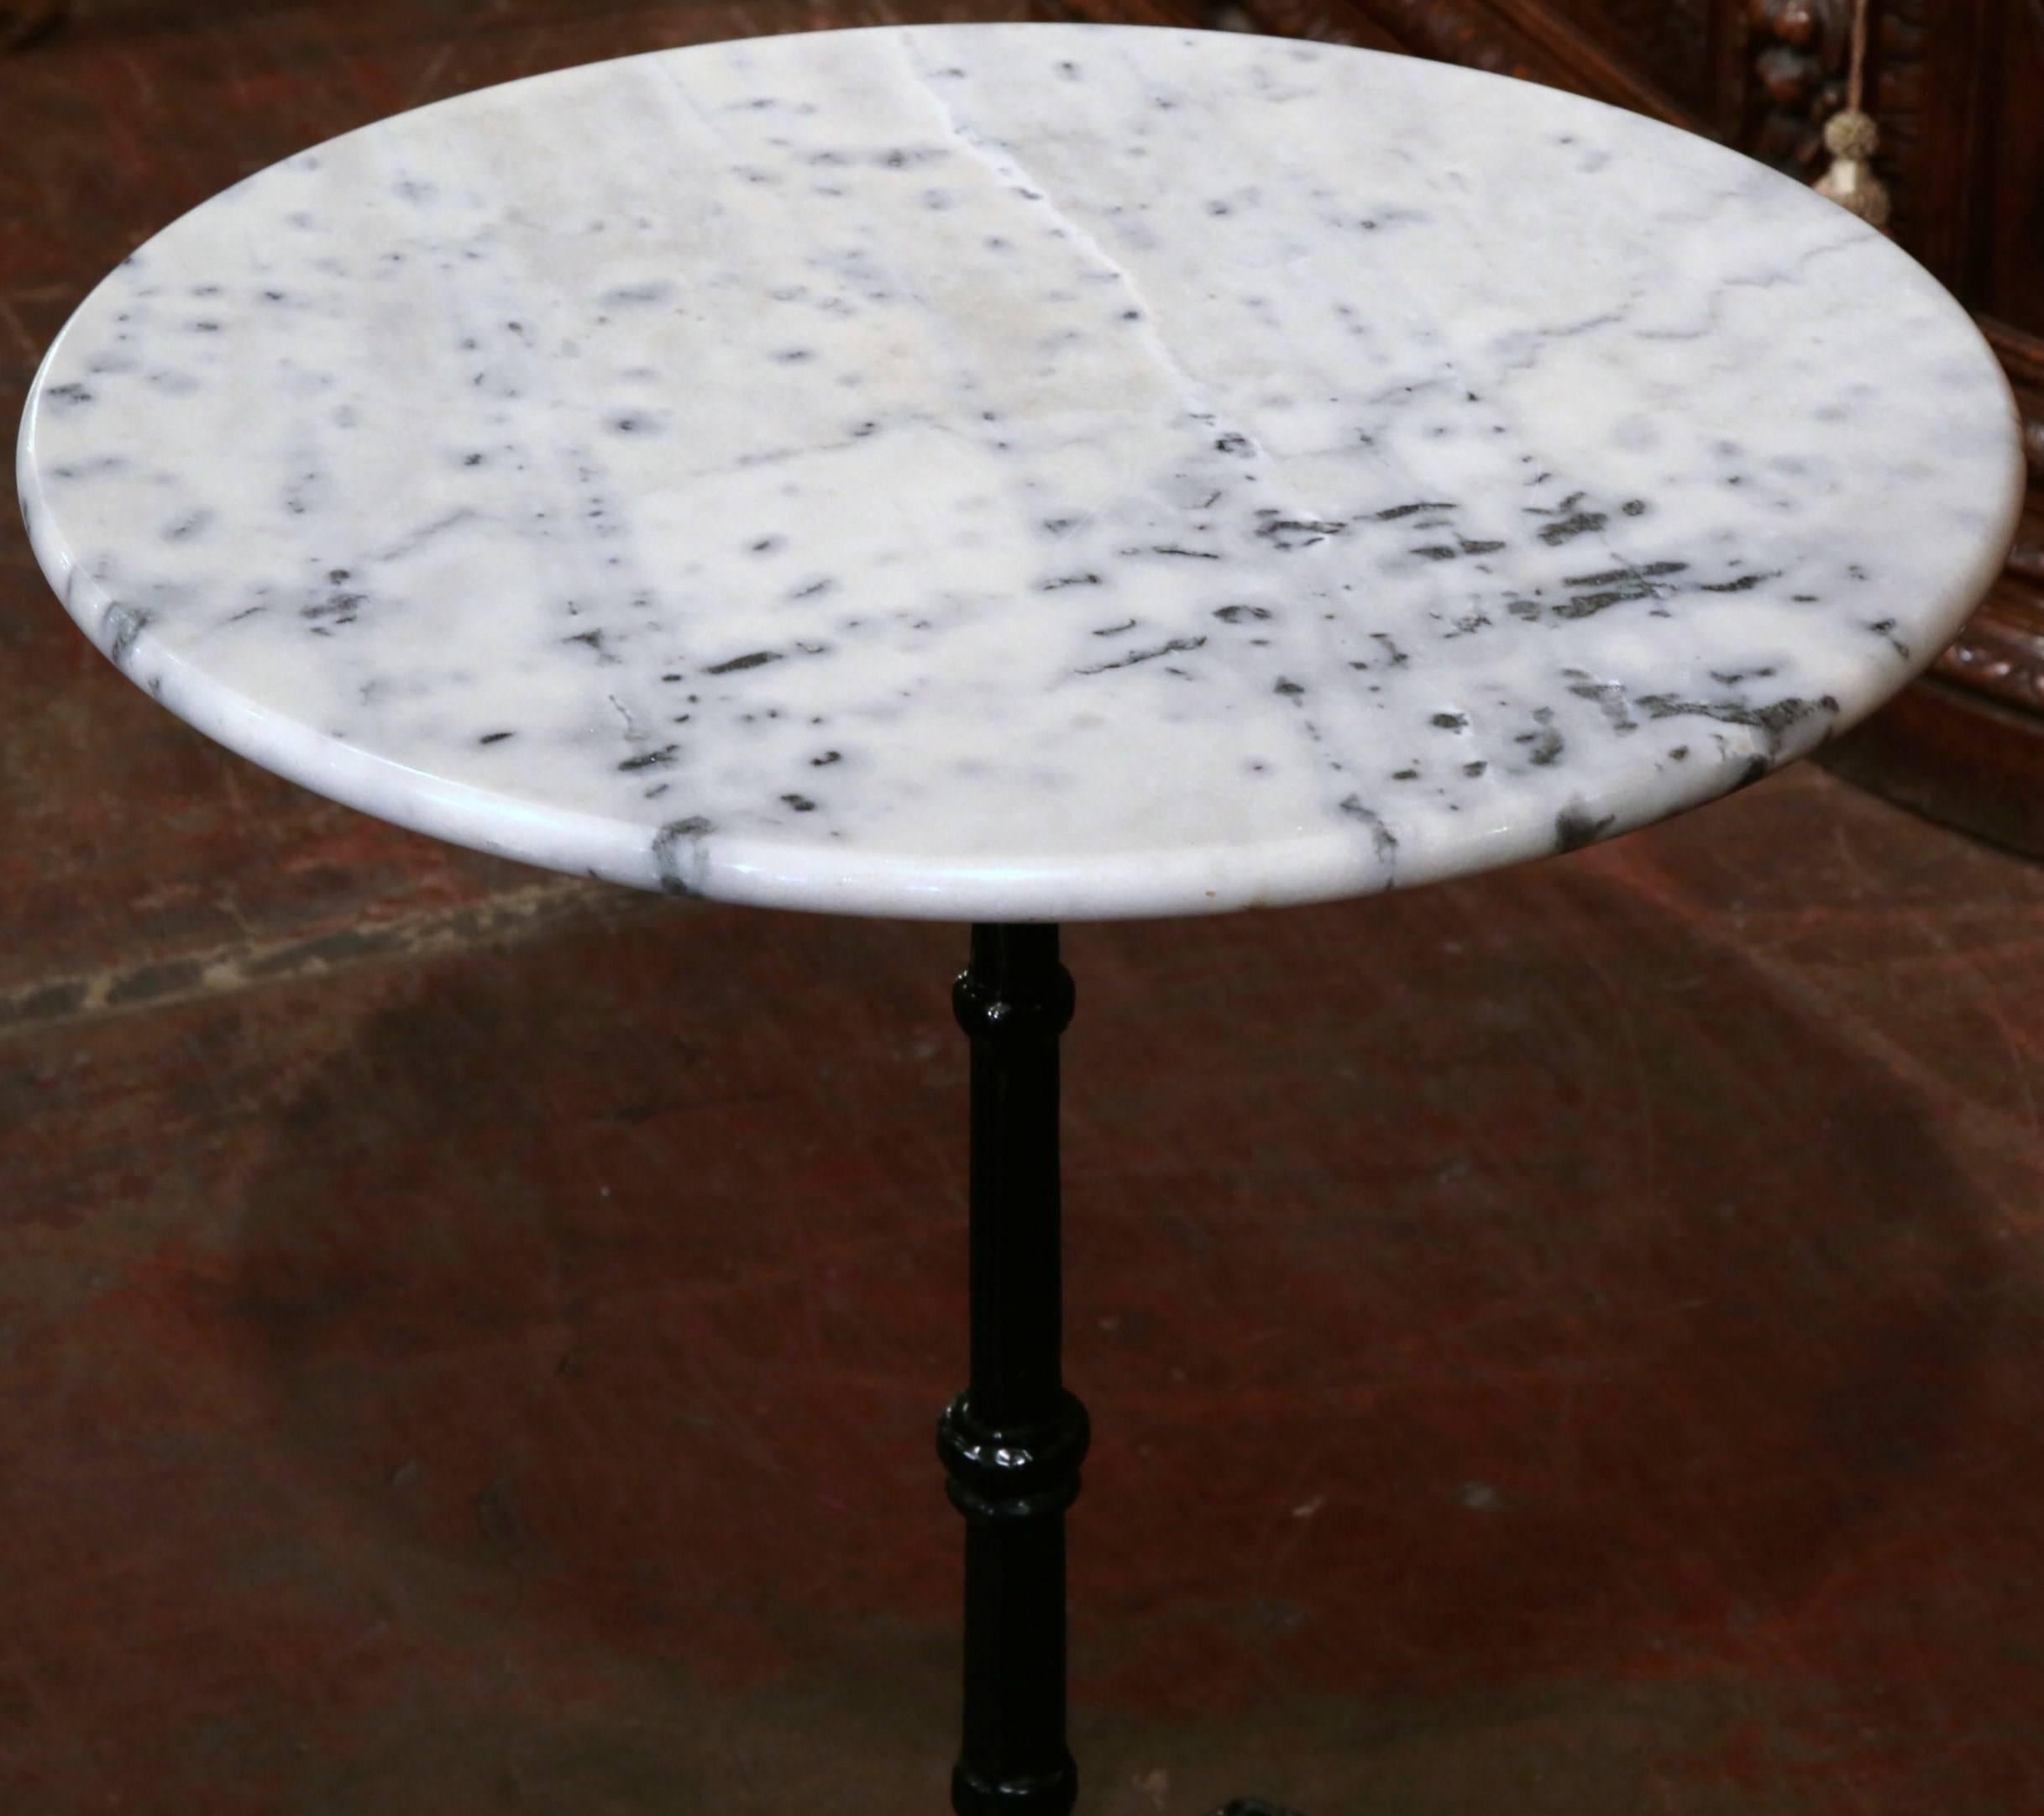 Turn of the century round bistro table from France, circa 1920. Single ornate pedestal with black paint and white/grey marble top. Excellent condition.